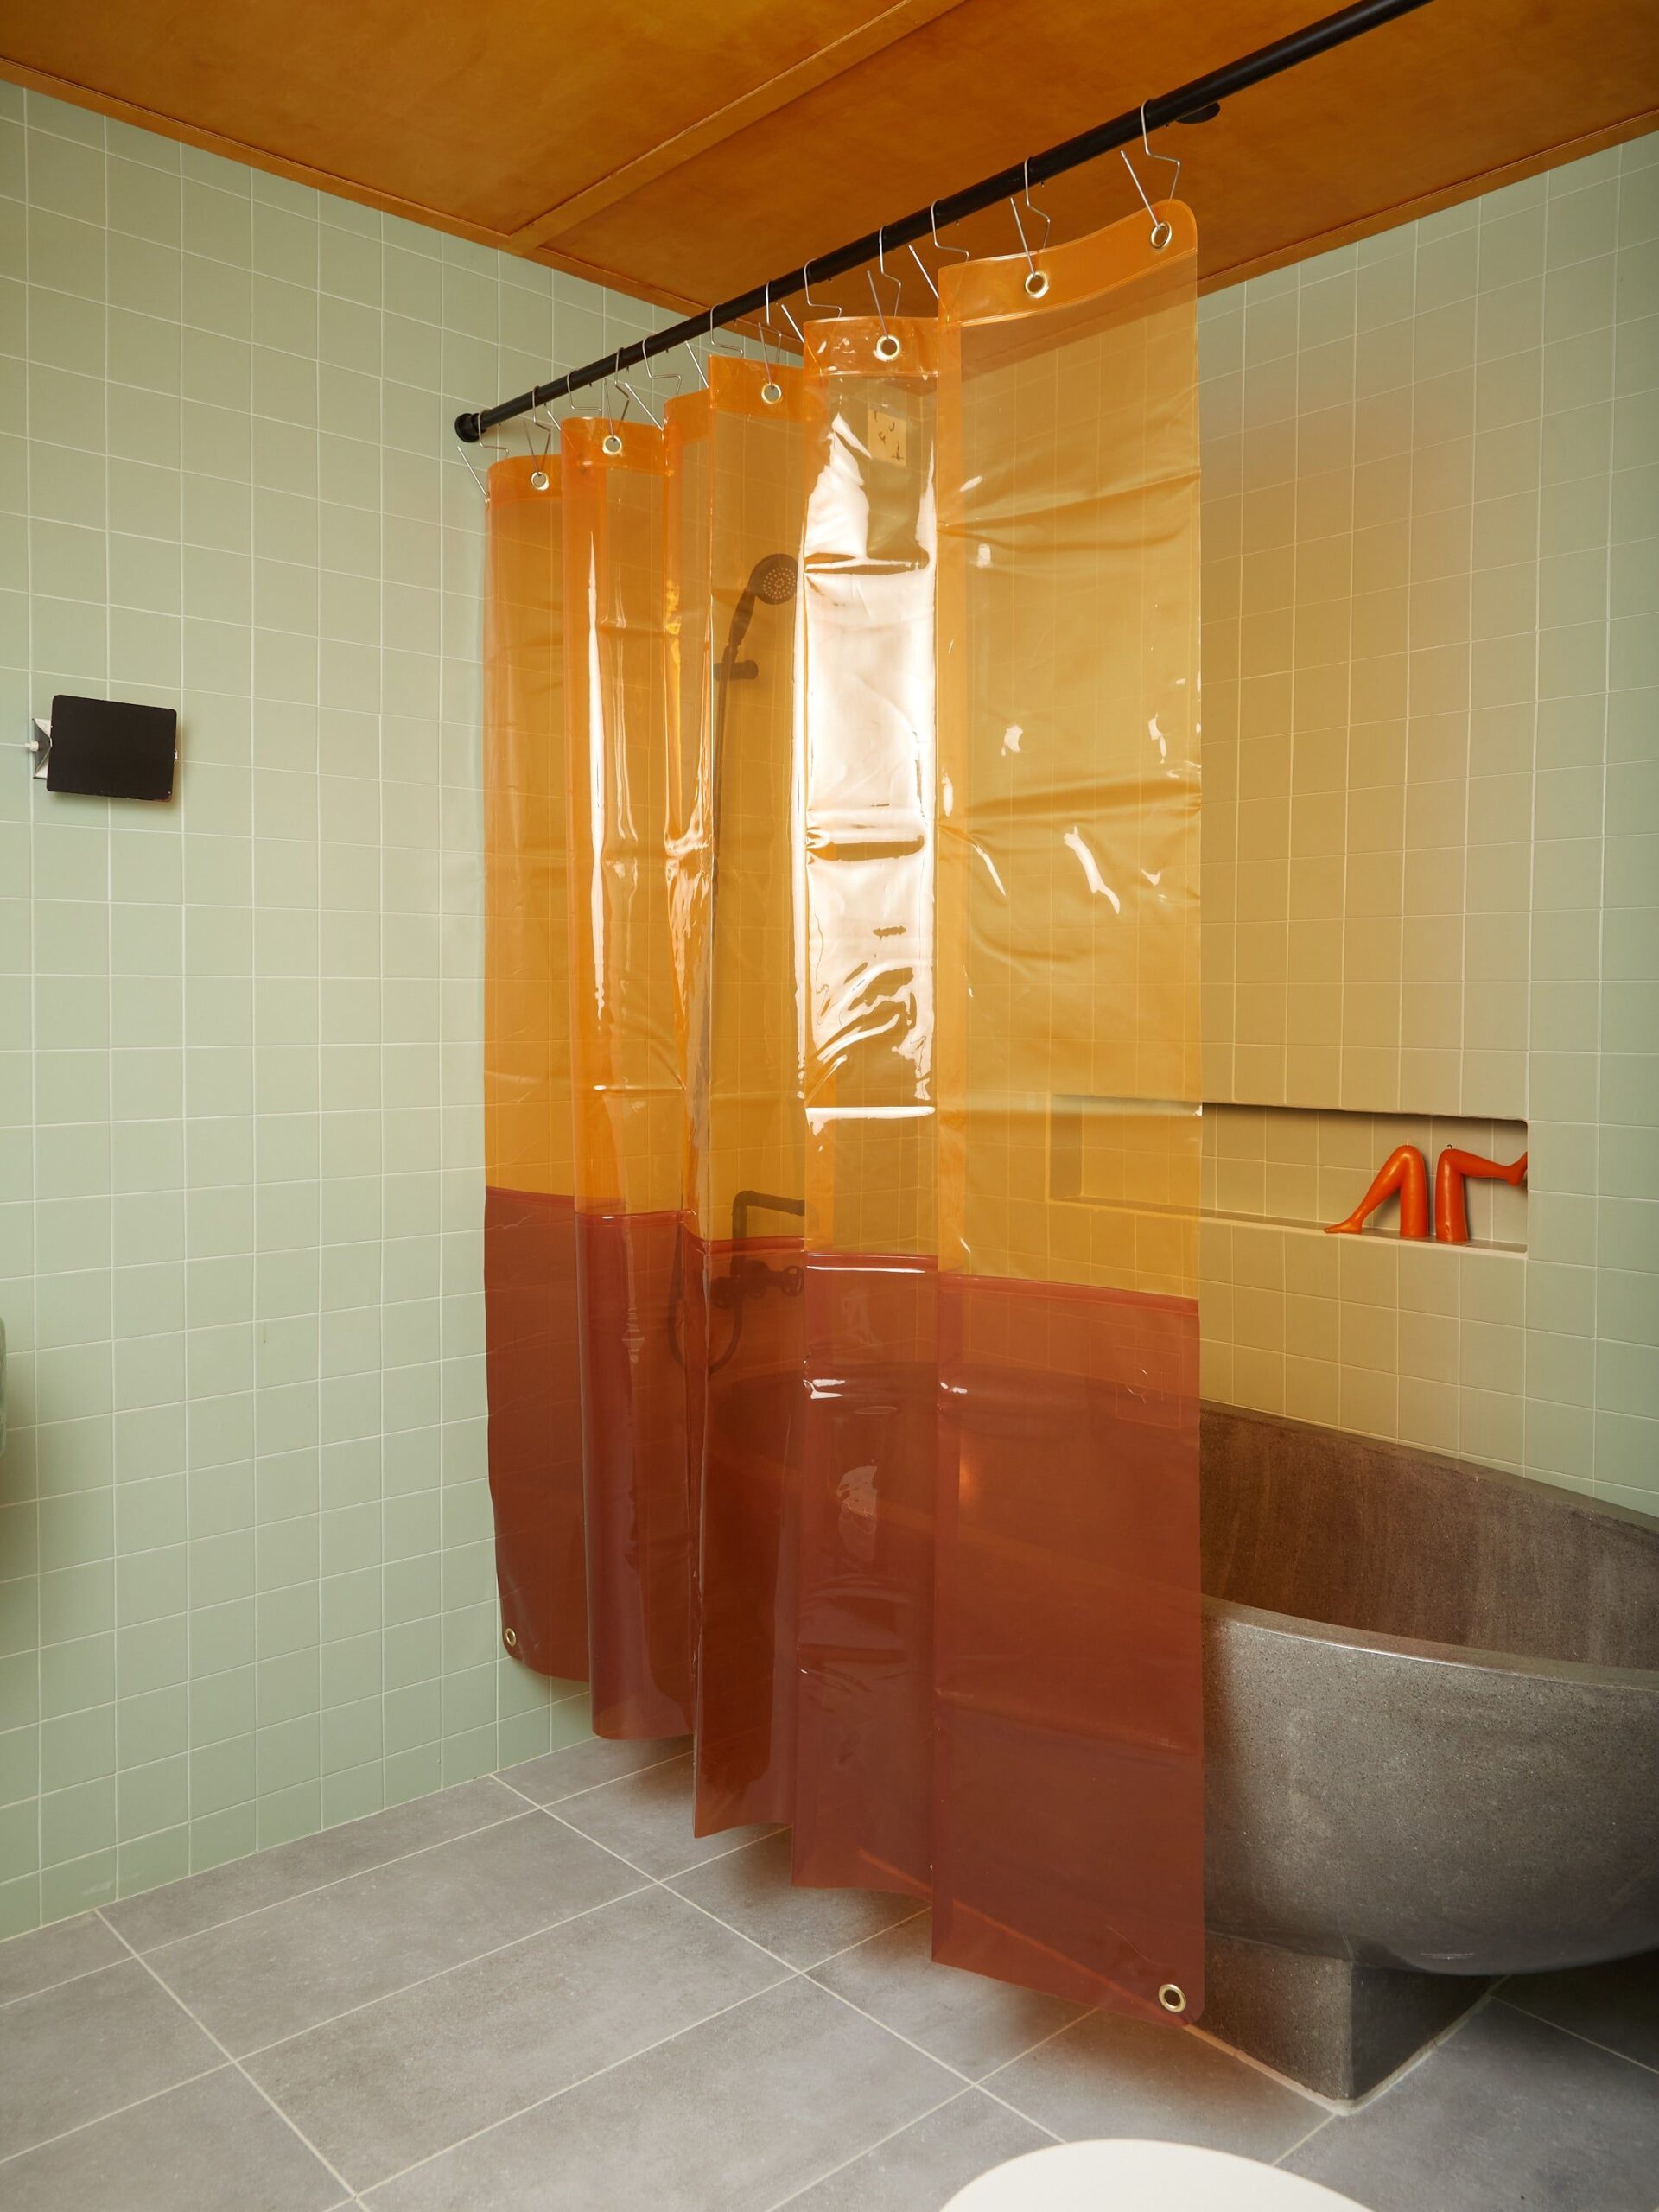 Shower Curtains Add Texture to Your Bathroom